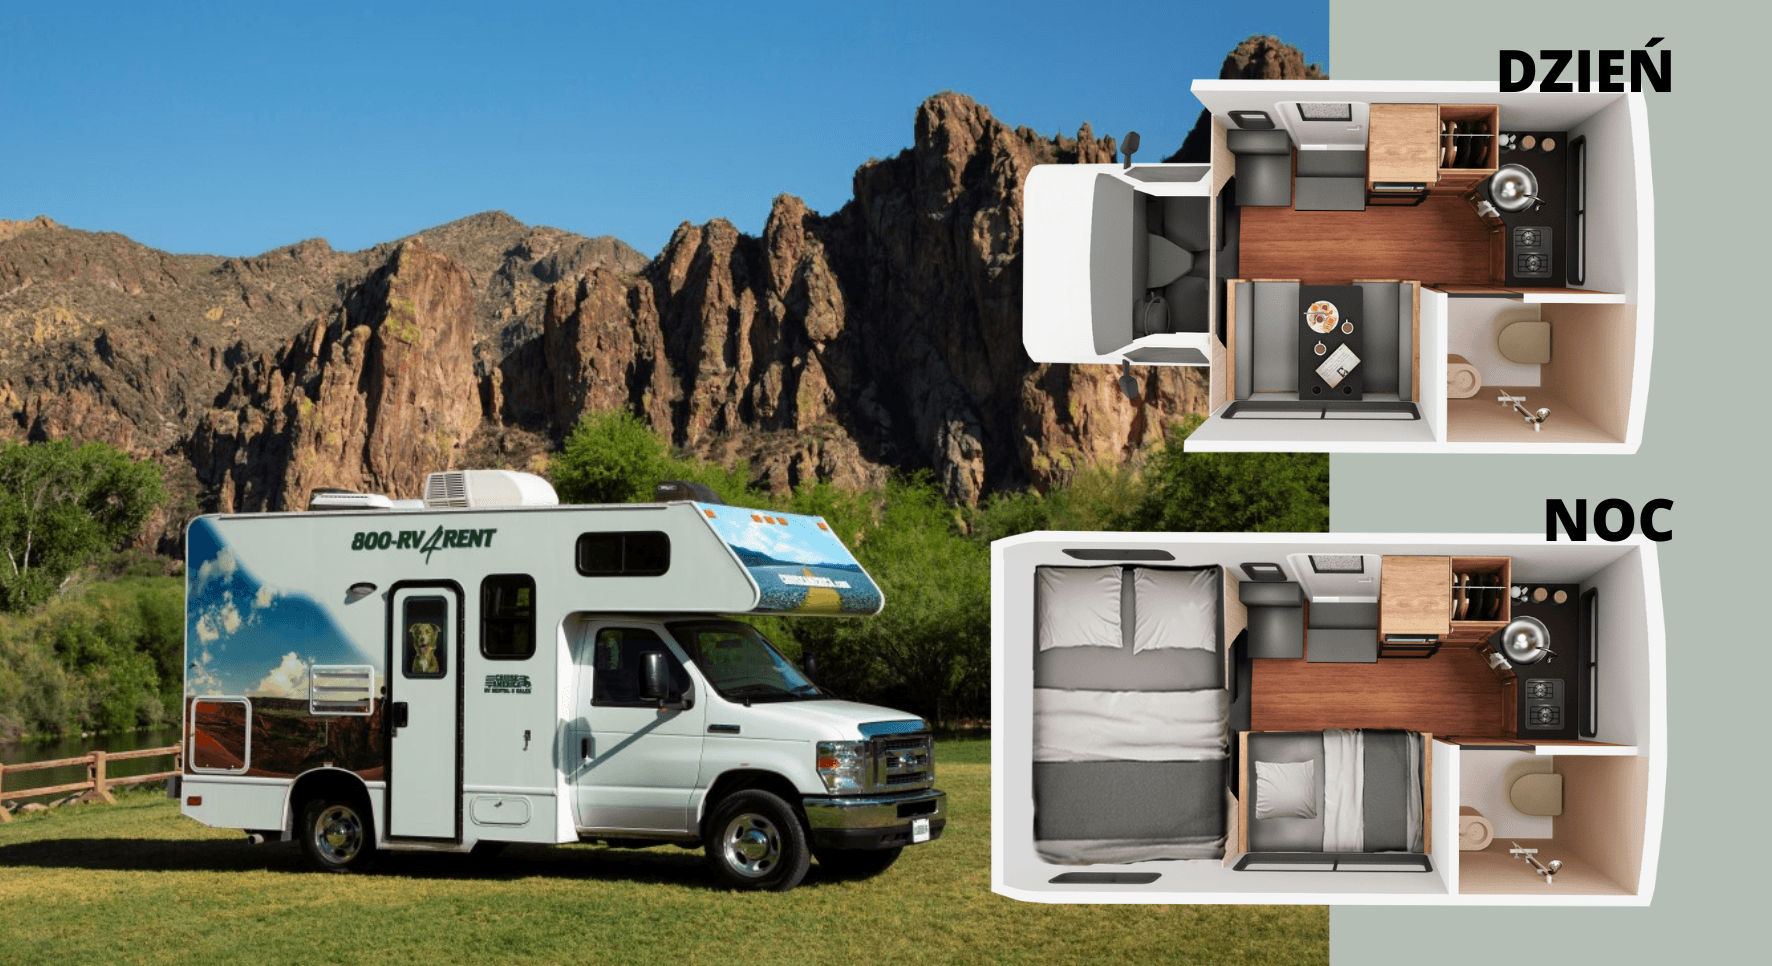 Types and equipment of motorhomes for rent in the USA and Canada – image 4